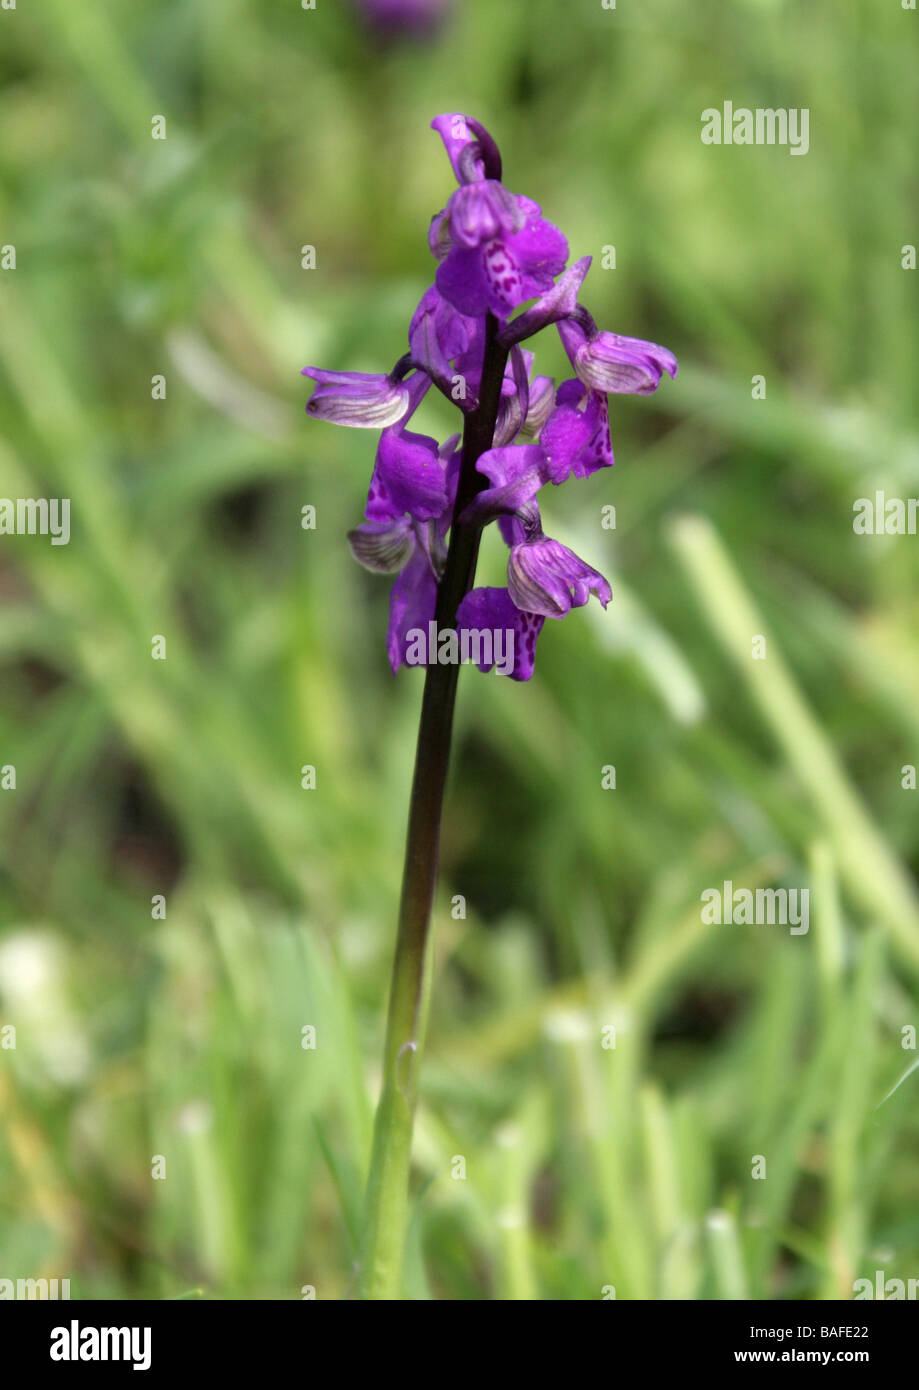 Green-winged Orchid or Green-veined Orchid, Anacamptis morio, Orchidaceae. UK Stock Photo